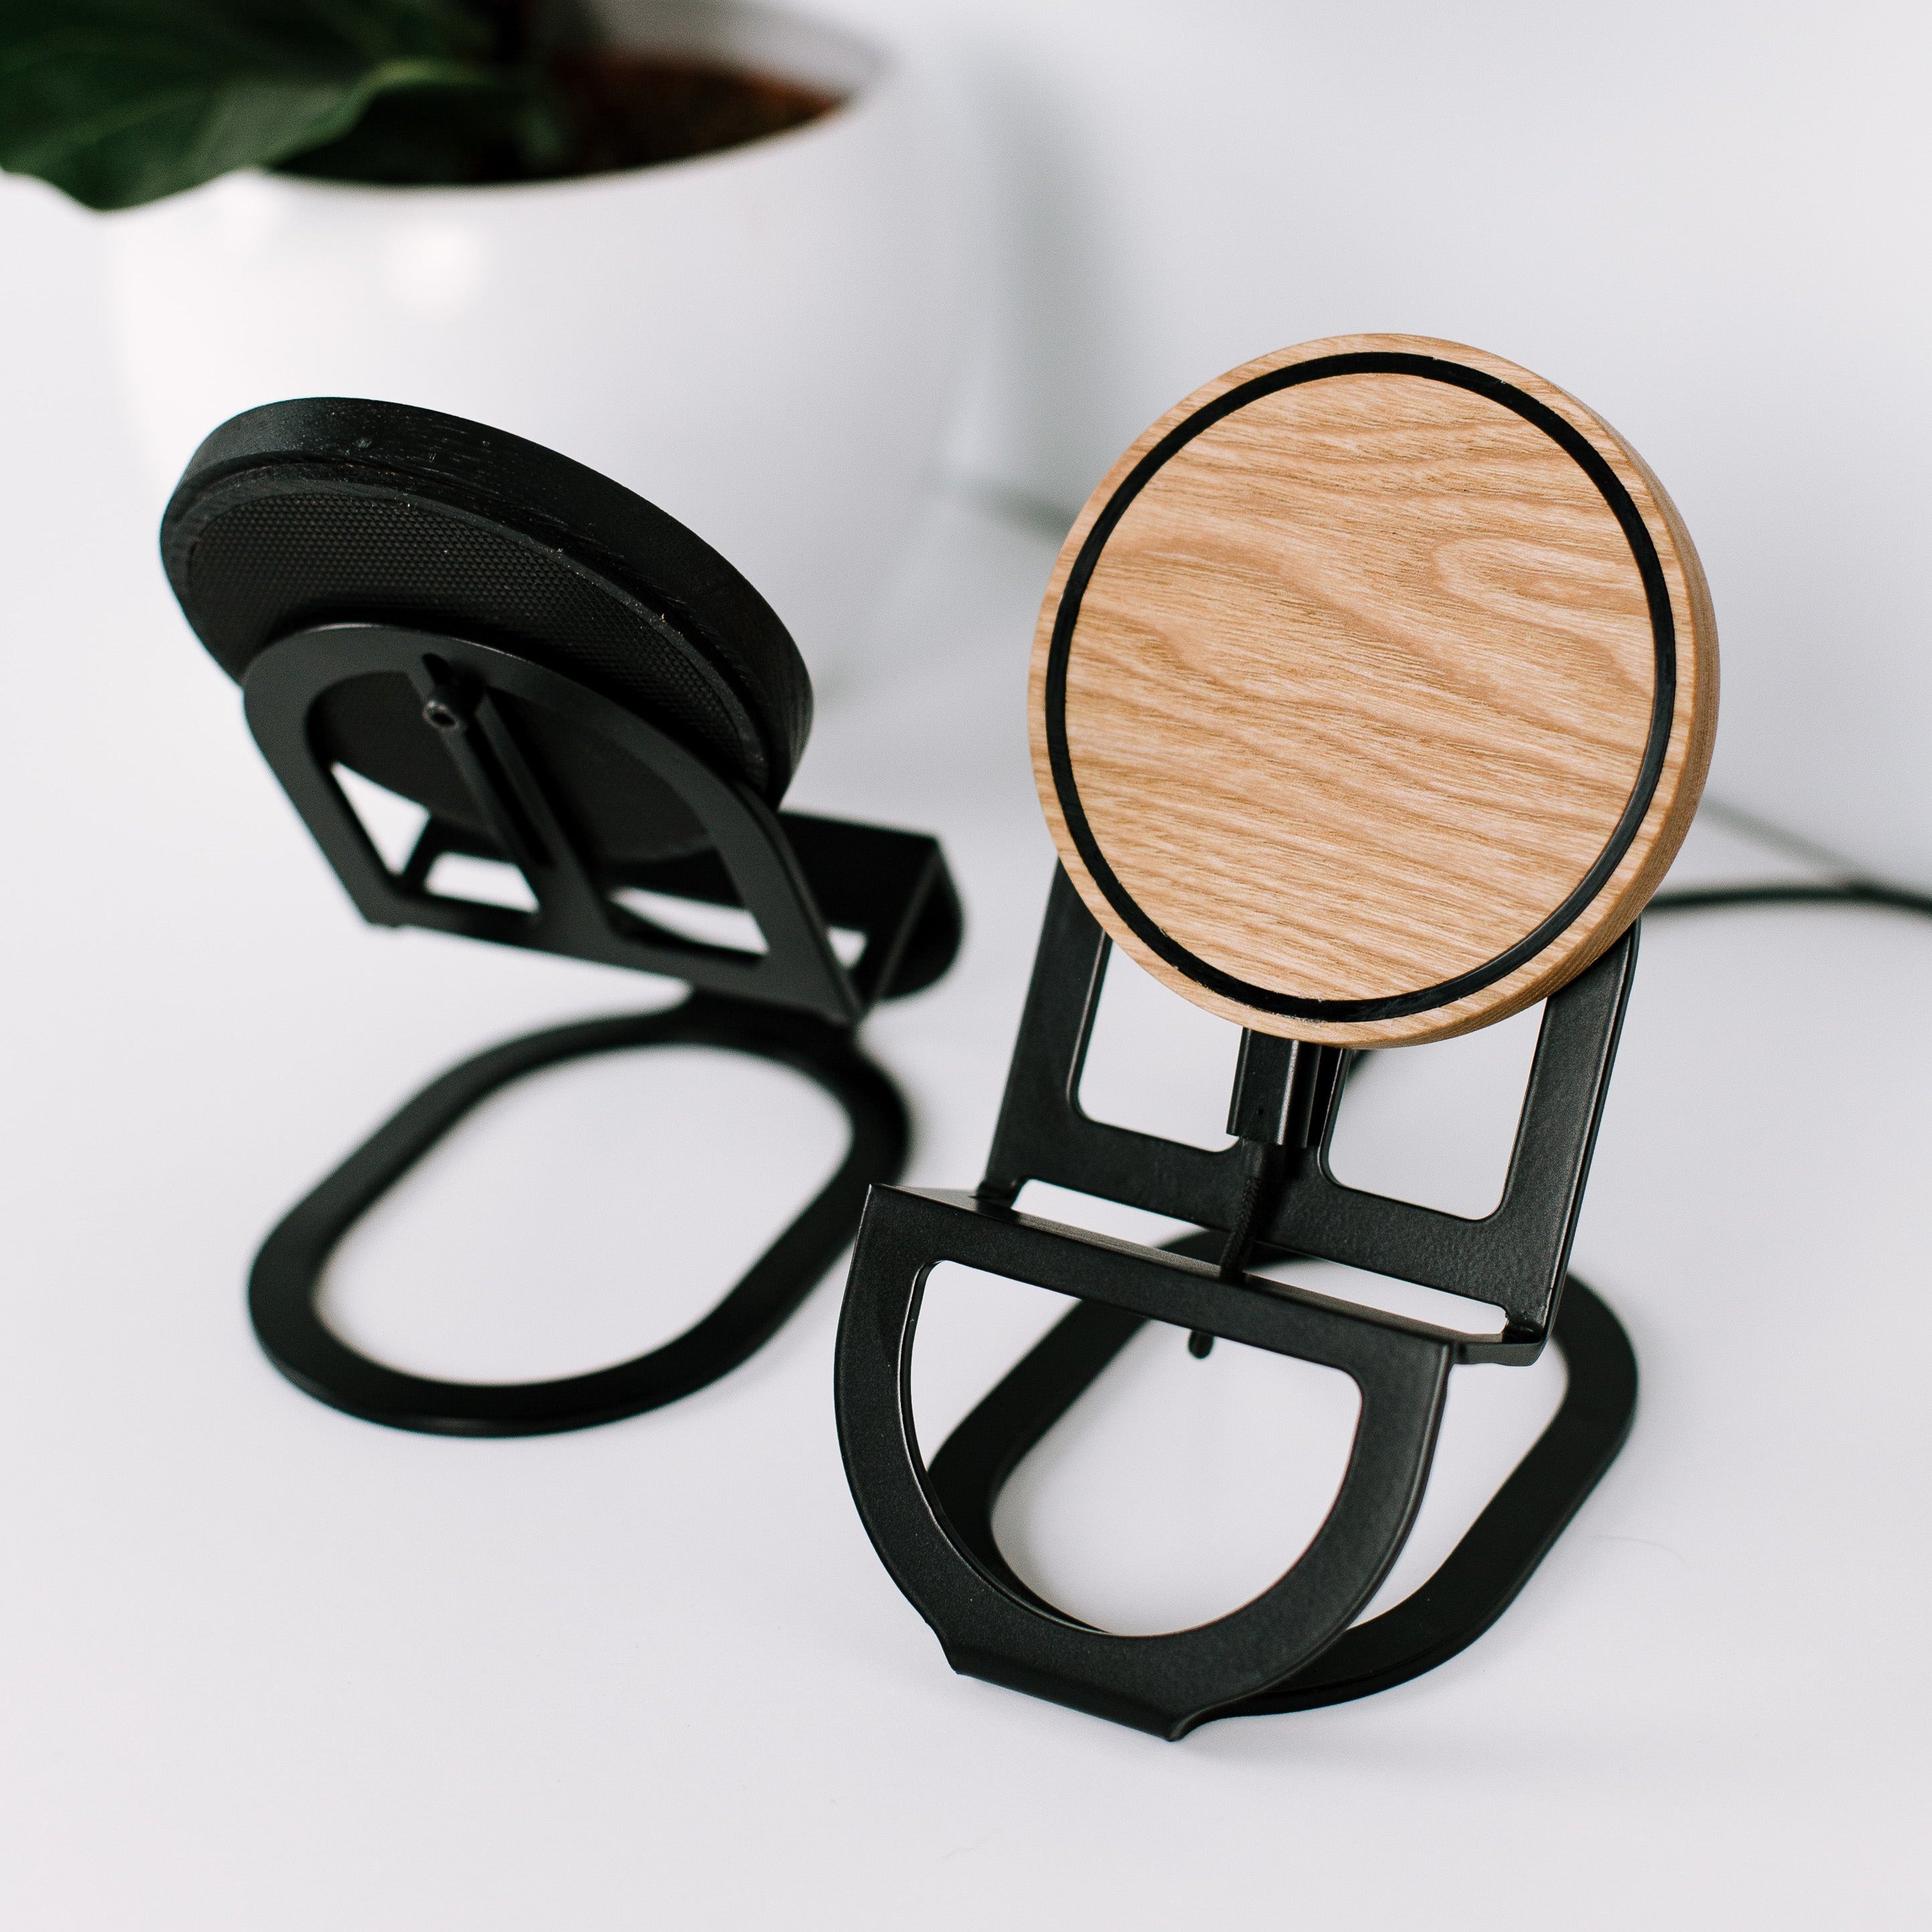 Wireless Charger Halo Pad Stand